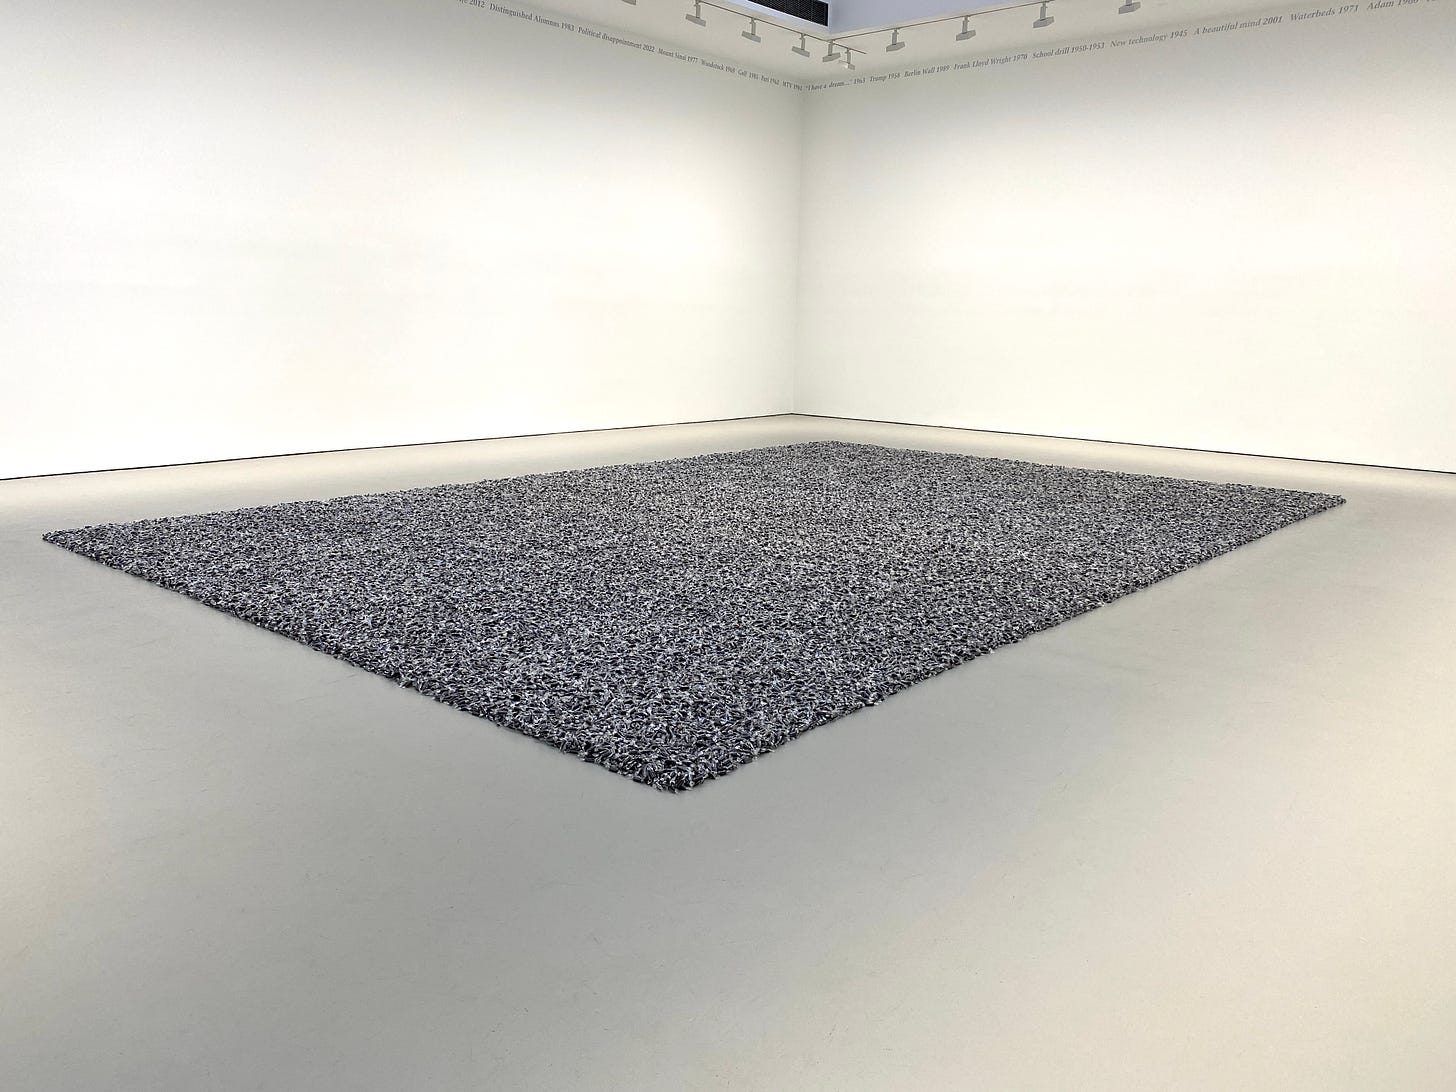 Felix Gonzalez-Torres, “Untitled” (Public Opinion), 1991. It shows a thick carpet of black rod licorice candies in clear wrappers laid out in a large rectangle on the floor of a white-walled gallery room. 